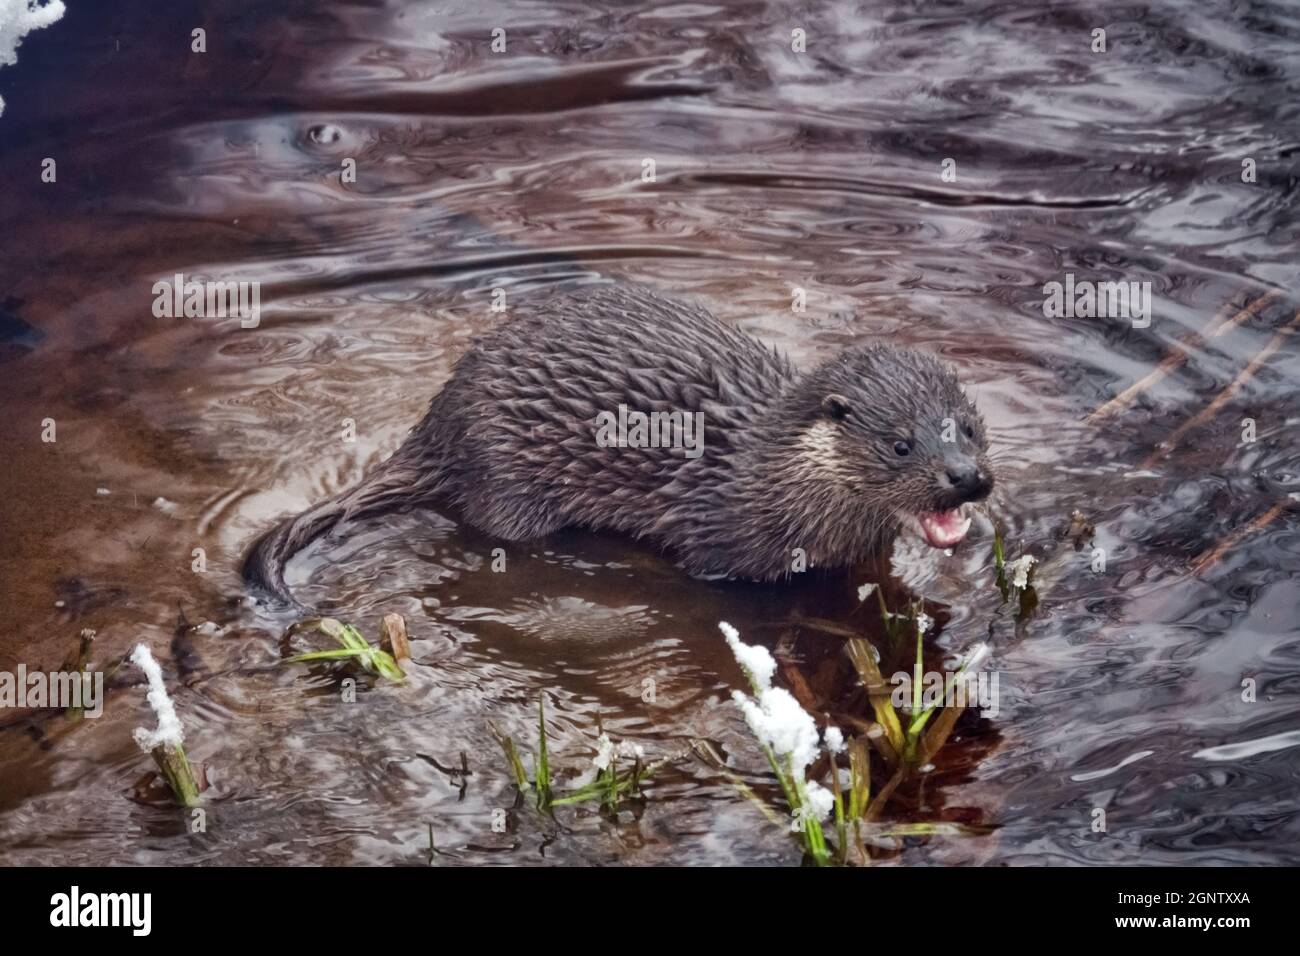 Young otter (Lufra vulgaris) on freezing northern river. In winter, otters leave their father's territory (age 5-6 months). Animal is in state of sear Stock Photo